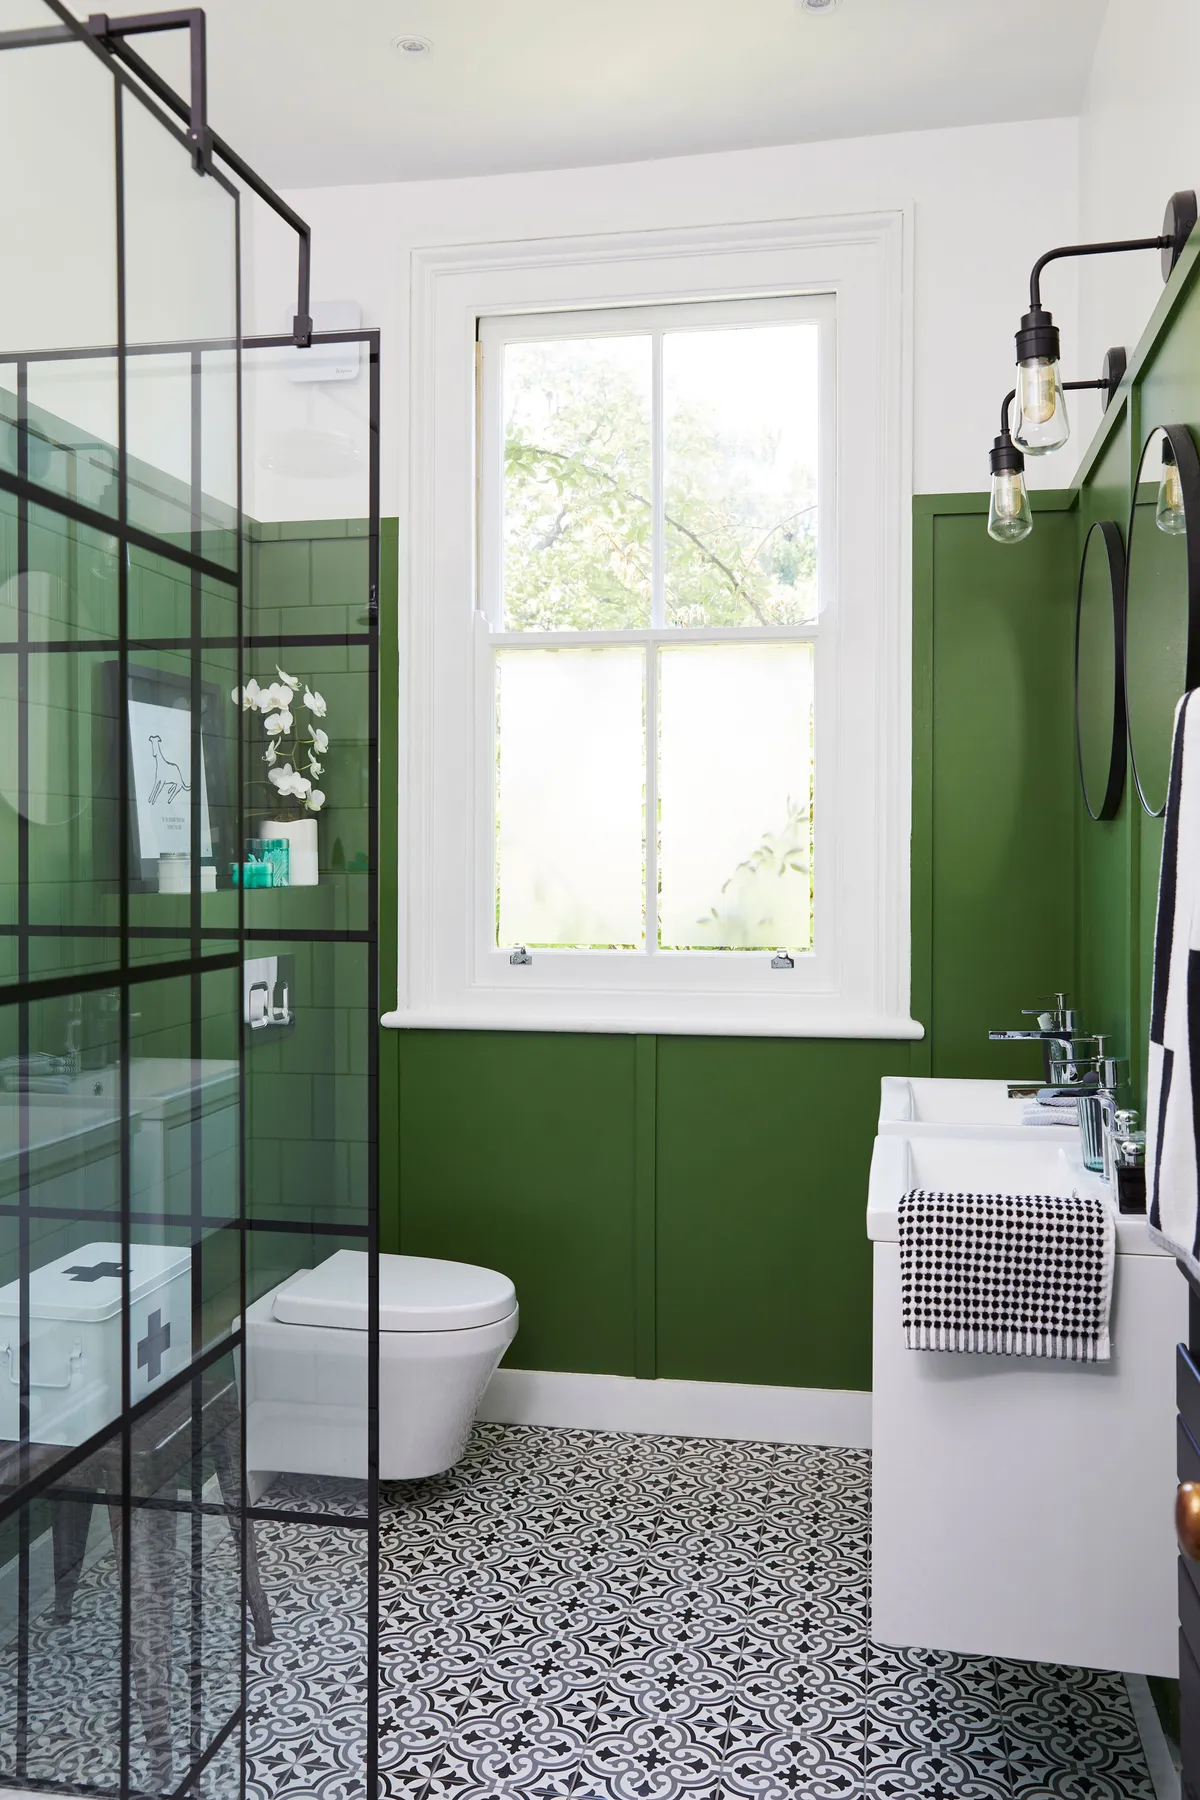 Crittall-style screens bring a touch of industrial styling to a bathroom